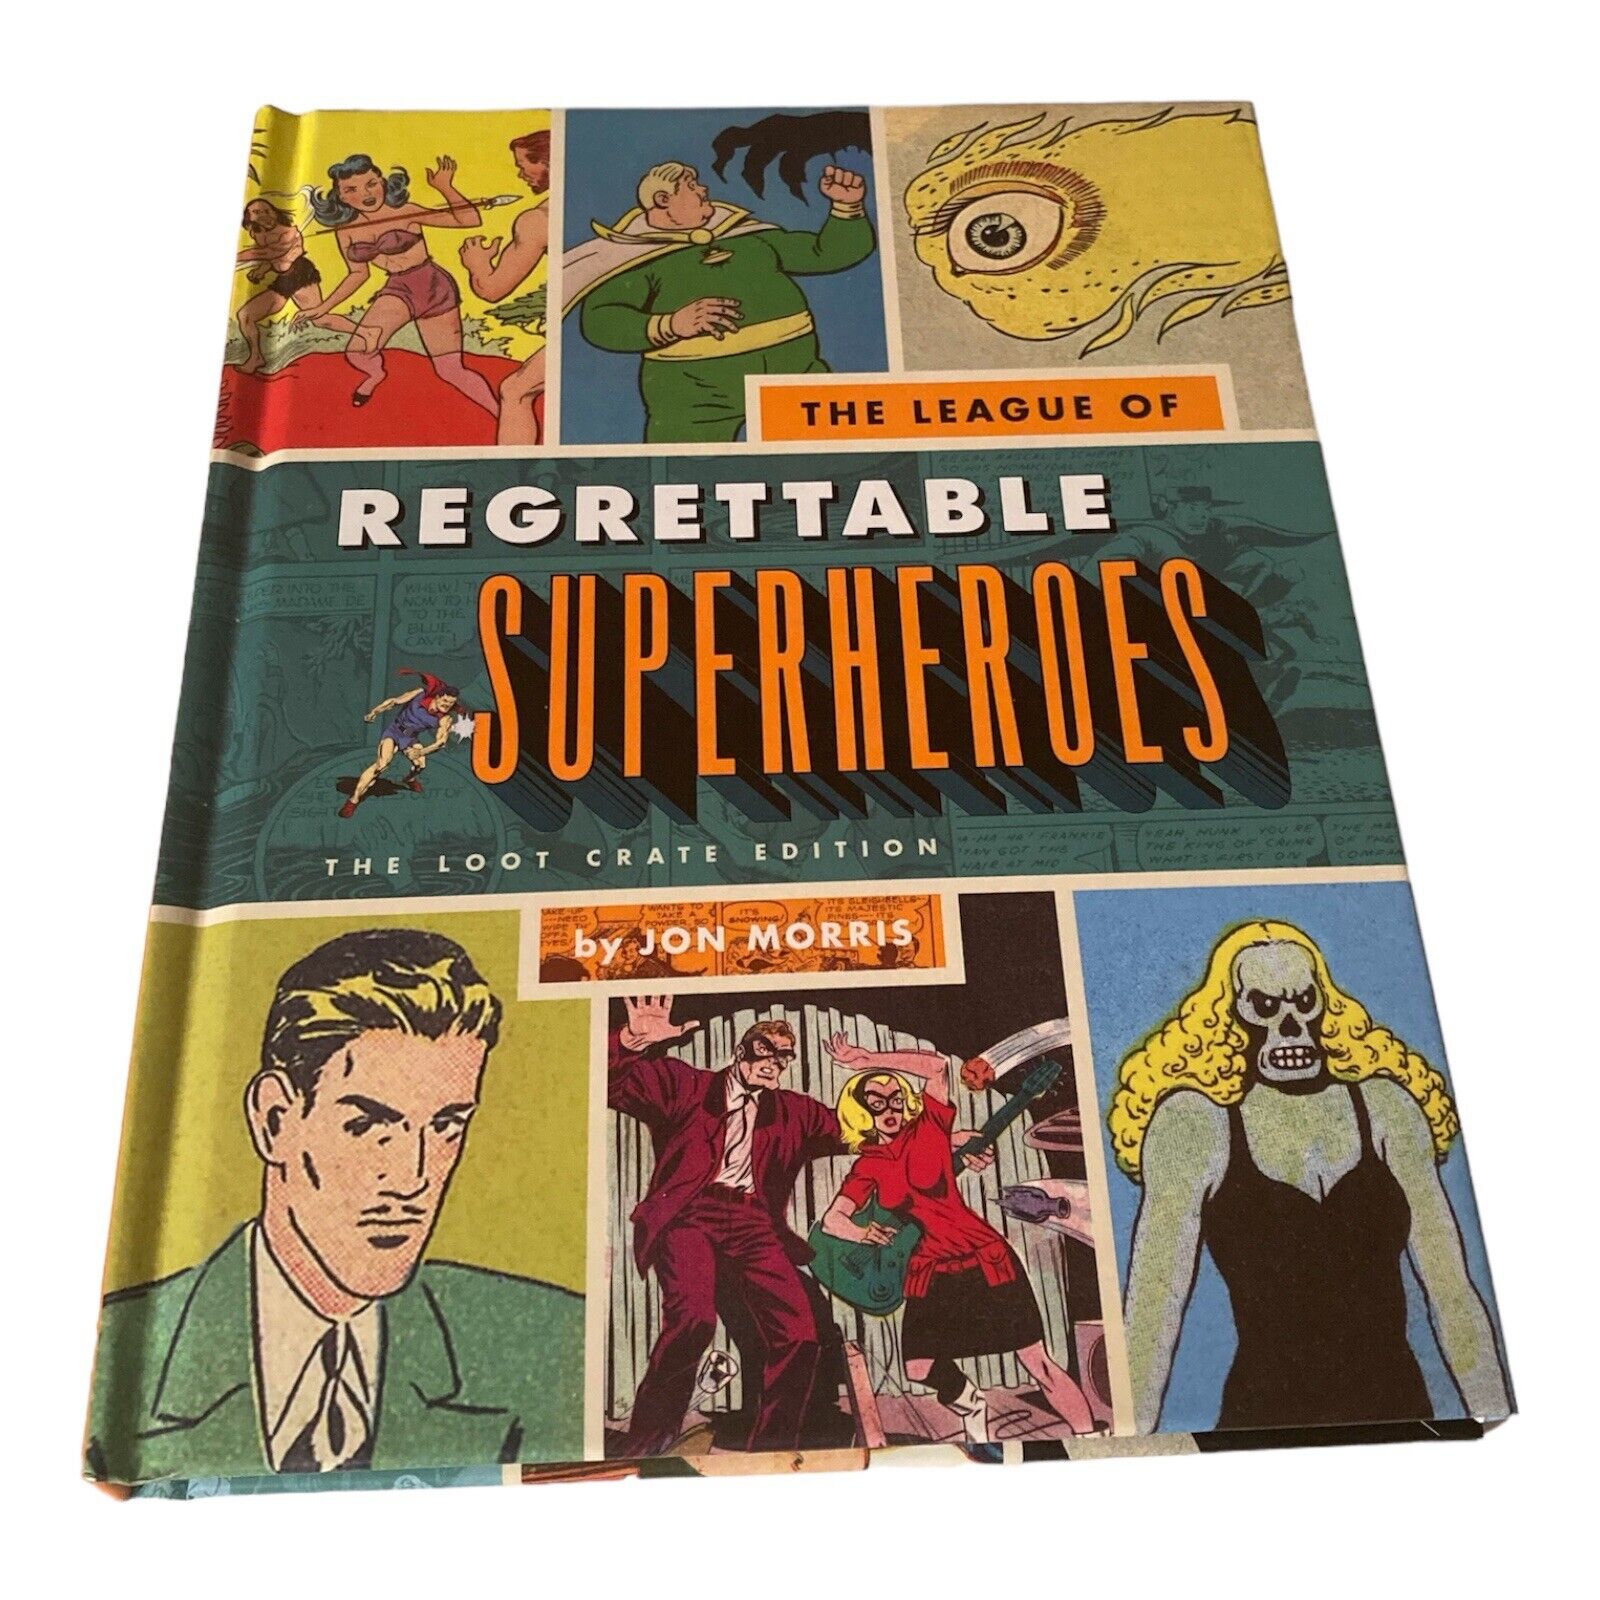 The League of Regrettable Superheroes Book Loot Crate Exclusive Brand New